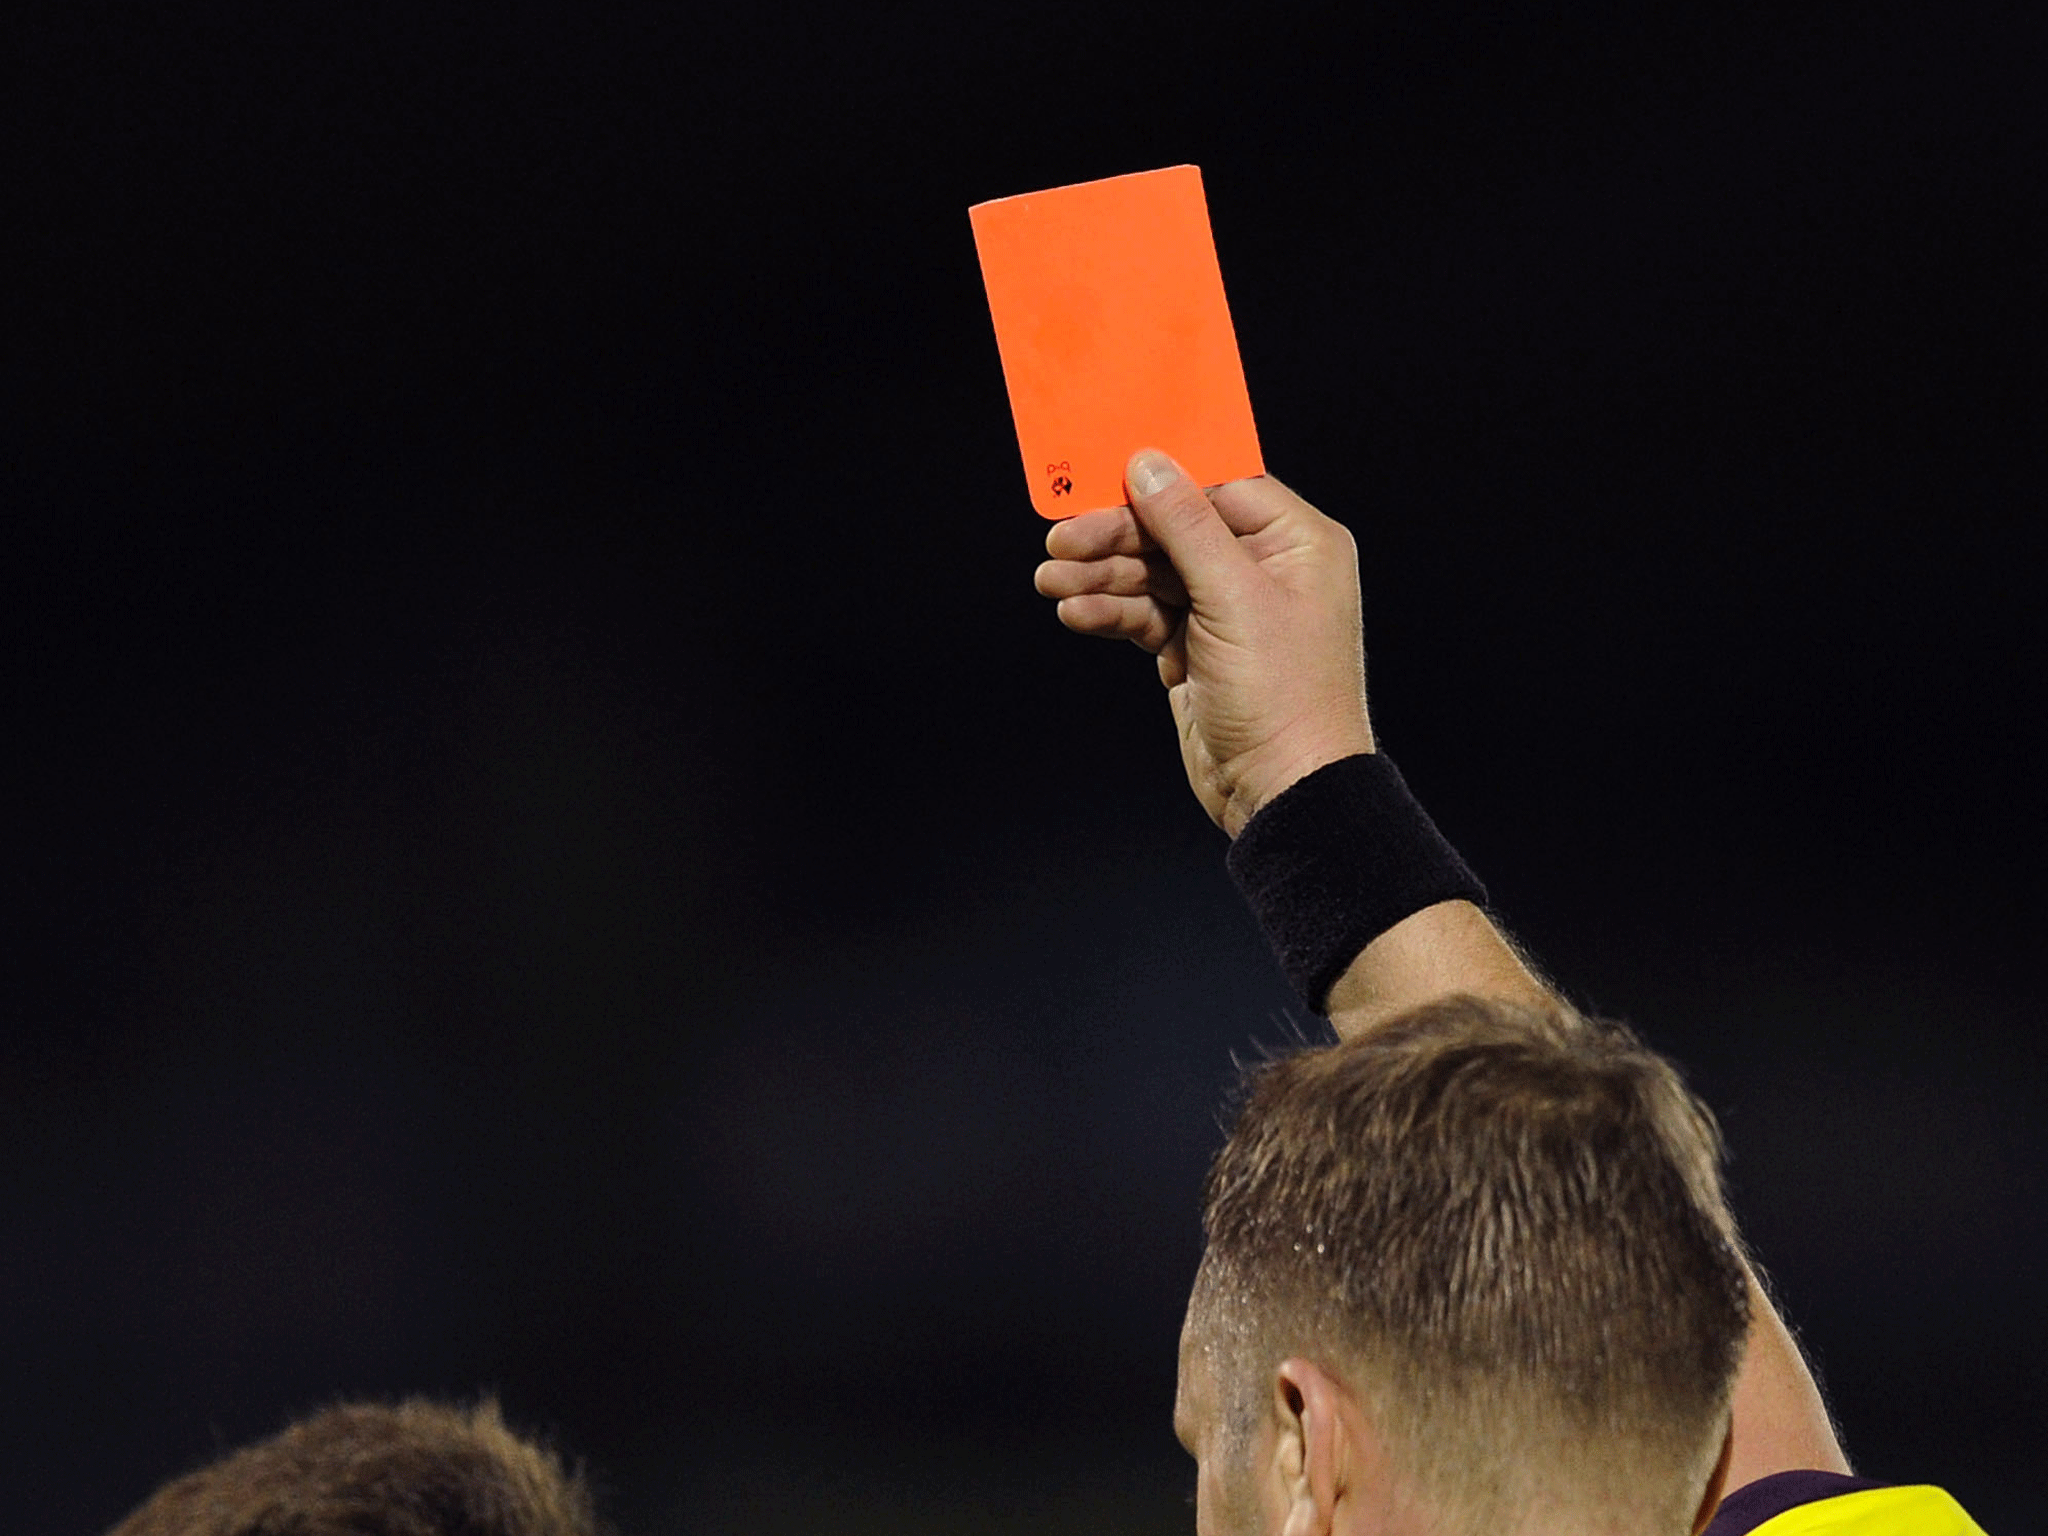 A referee brandishes a red card